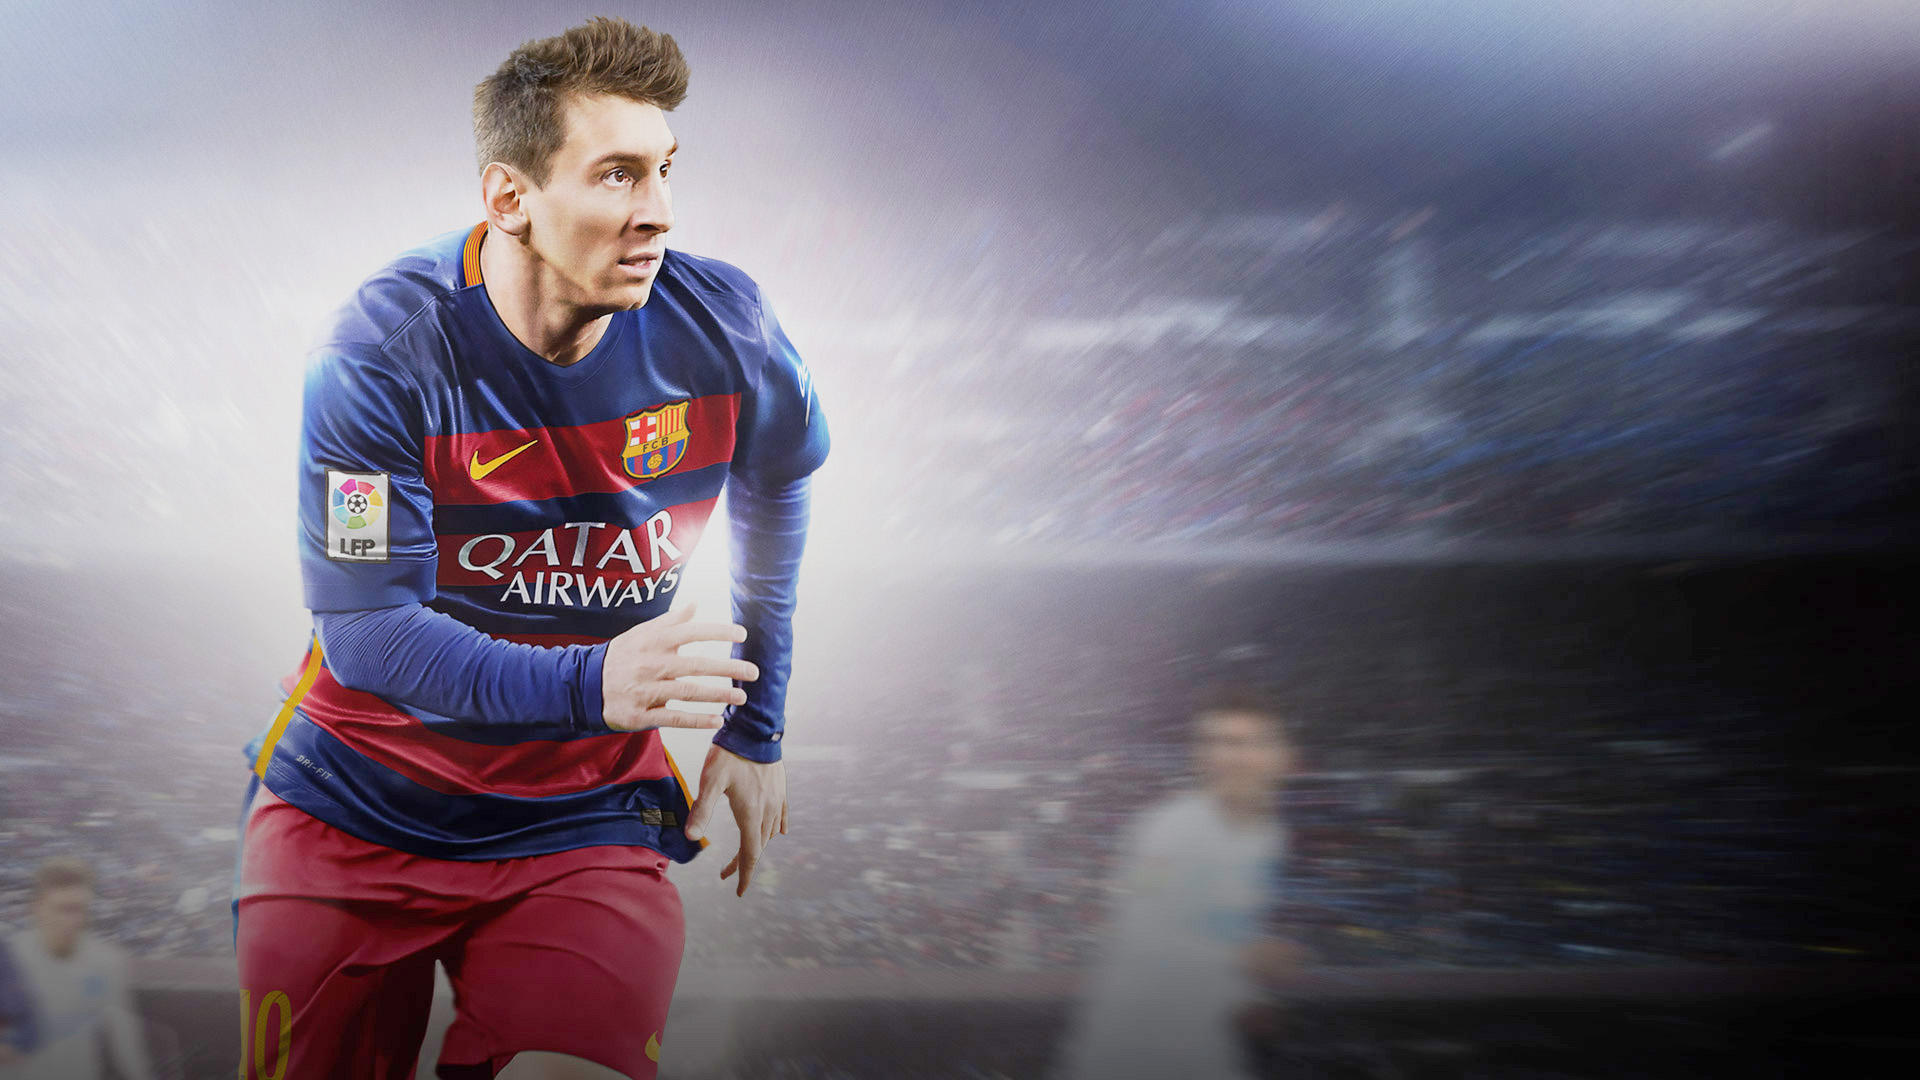 Top For Fifa 16 Wallpapers